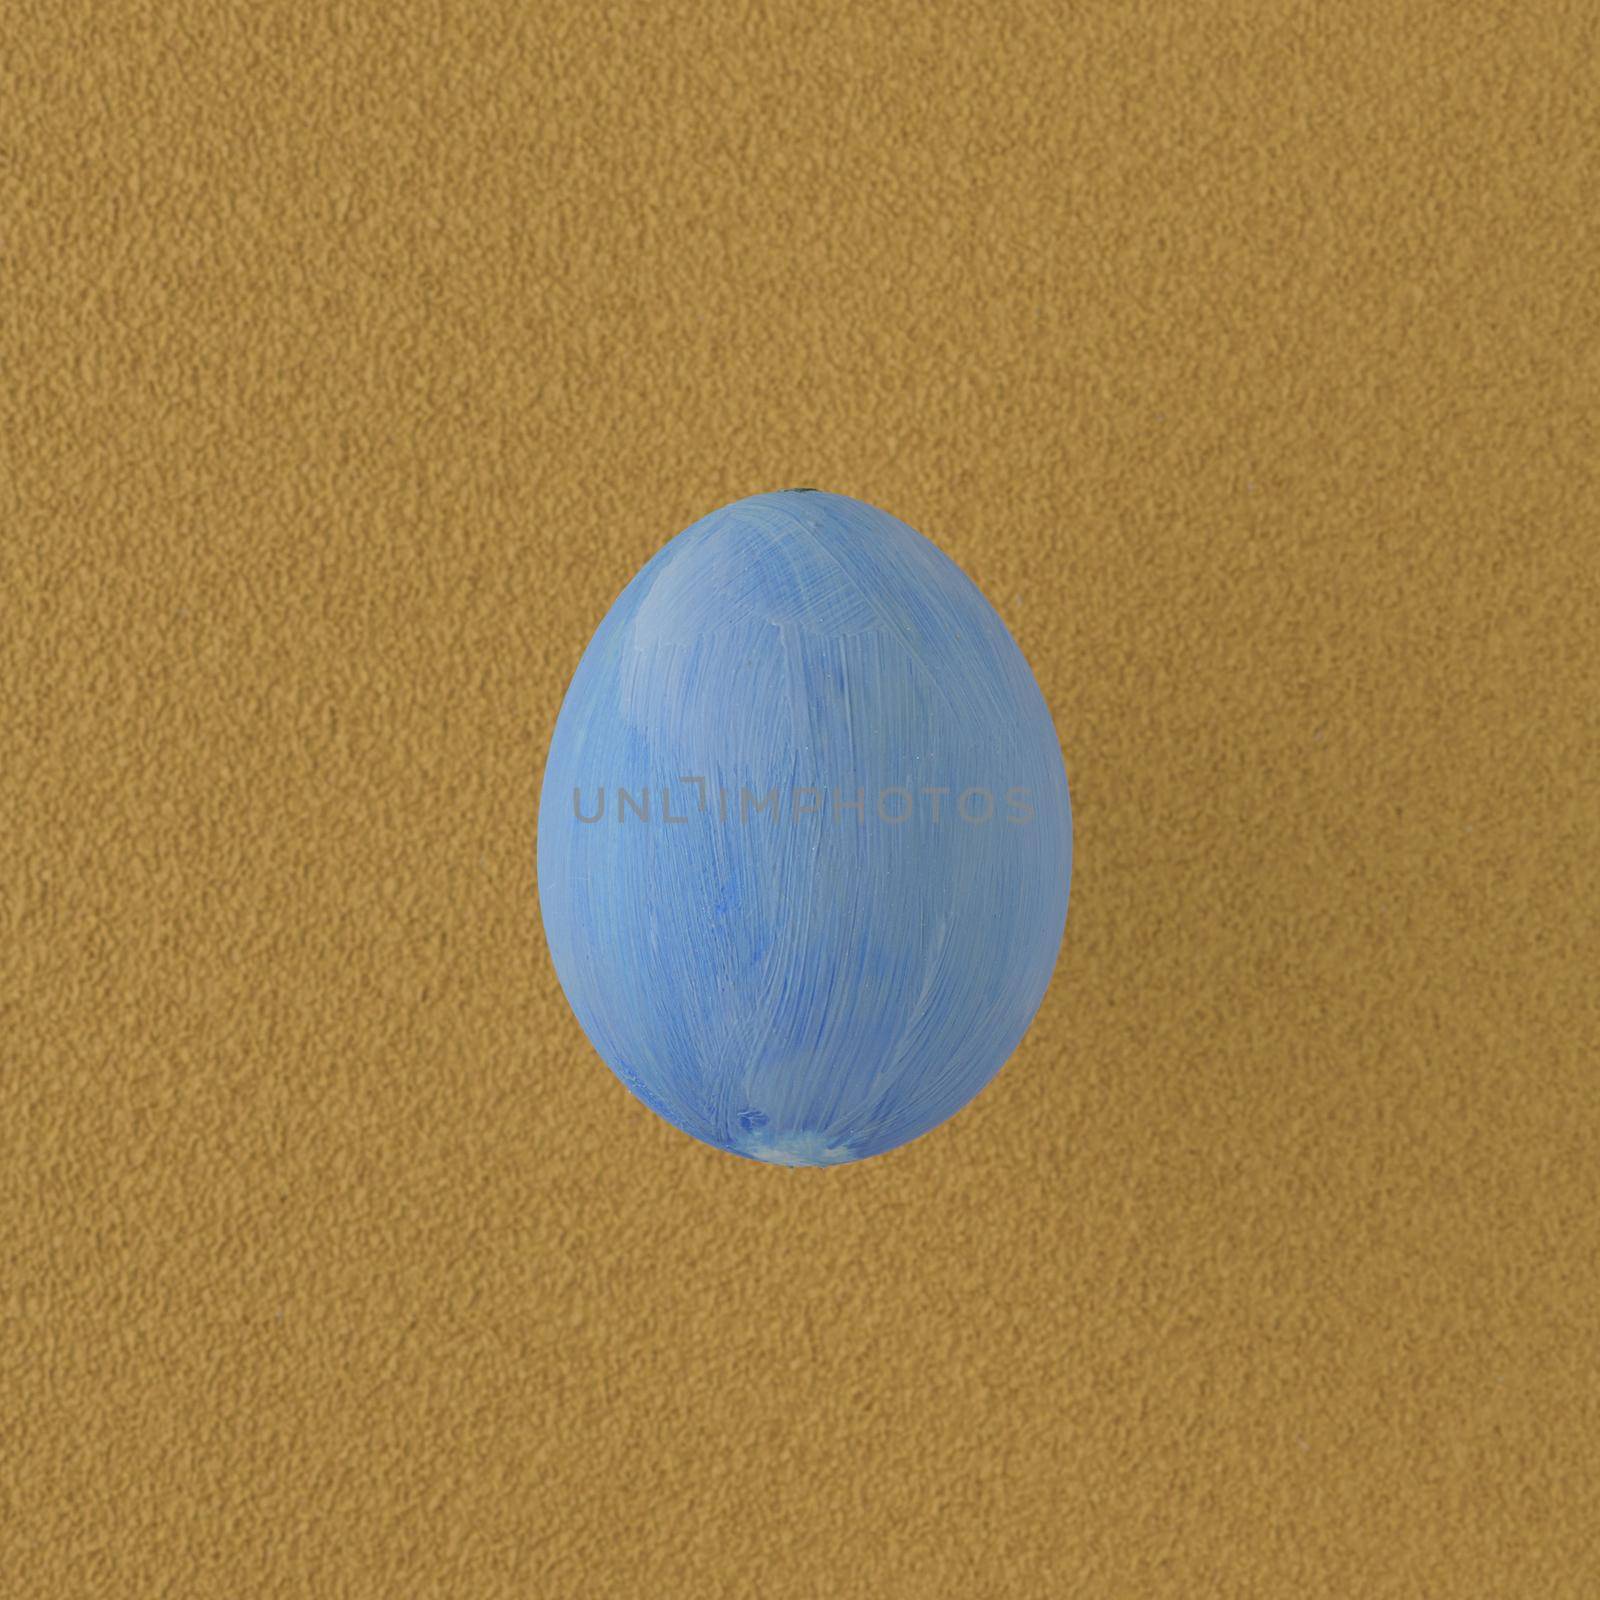 Blue painted egg on yellow background.